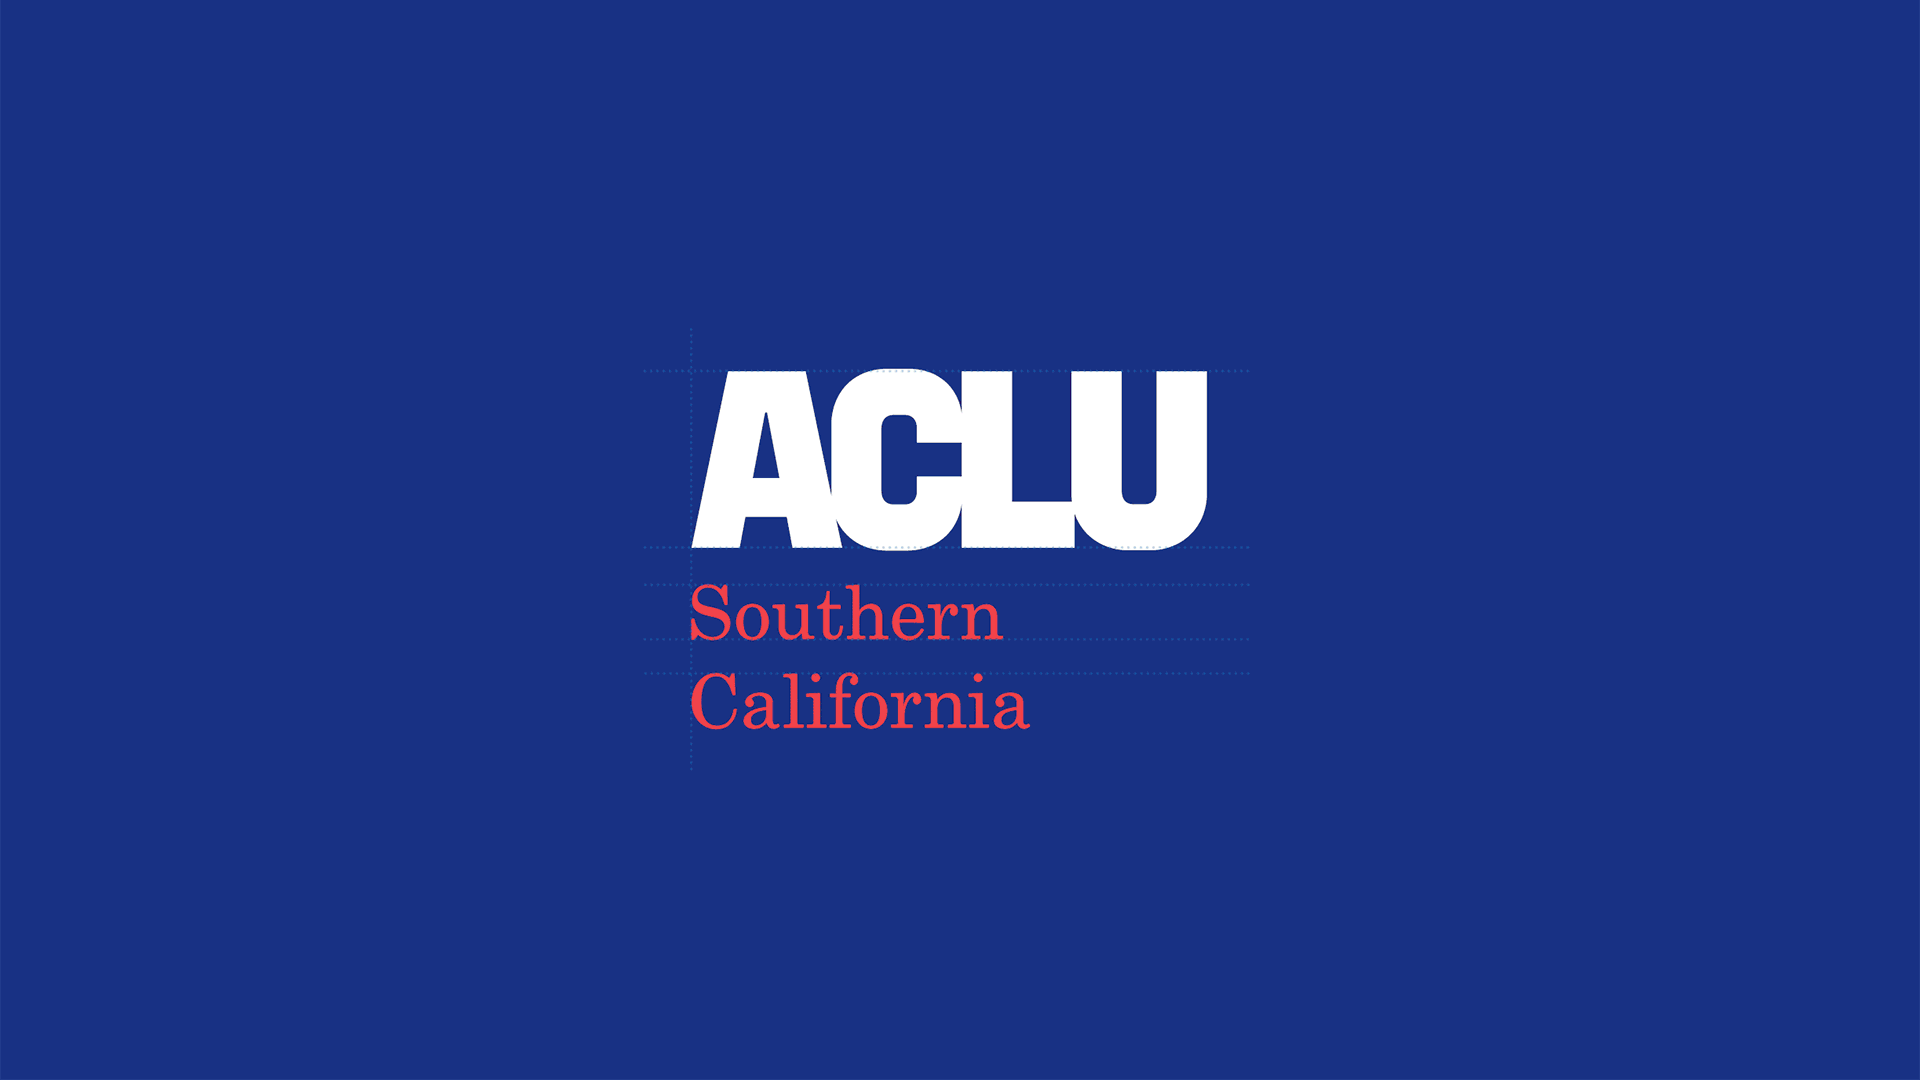 ACLU Logo - Brand New: New Logo and Identity for ACLU by Open, Co:Collective